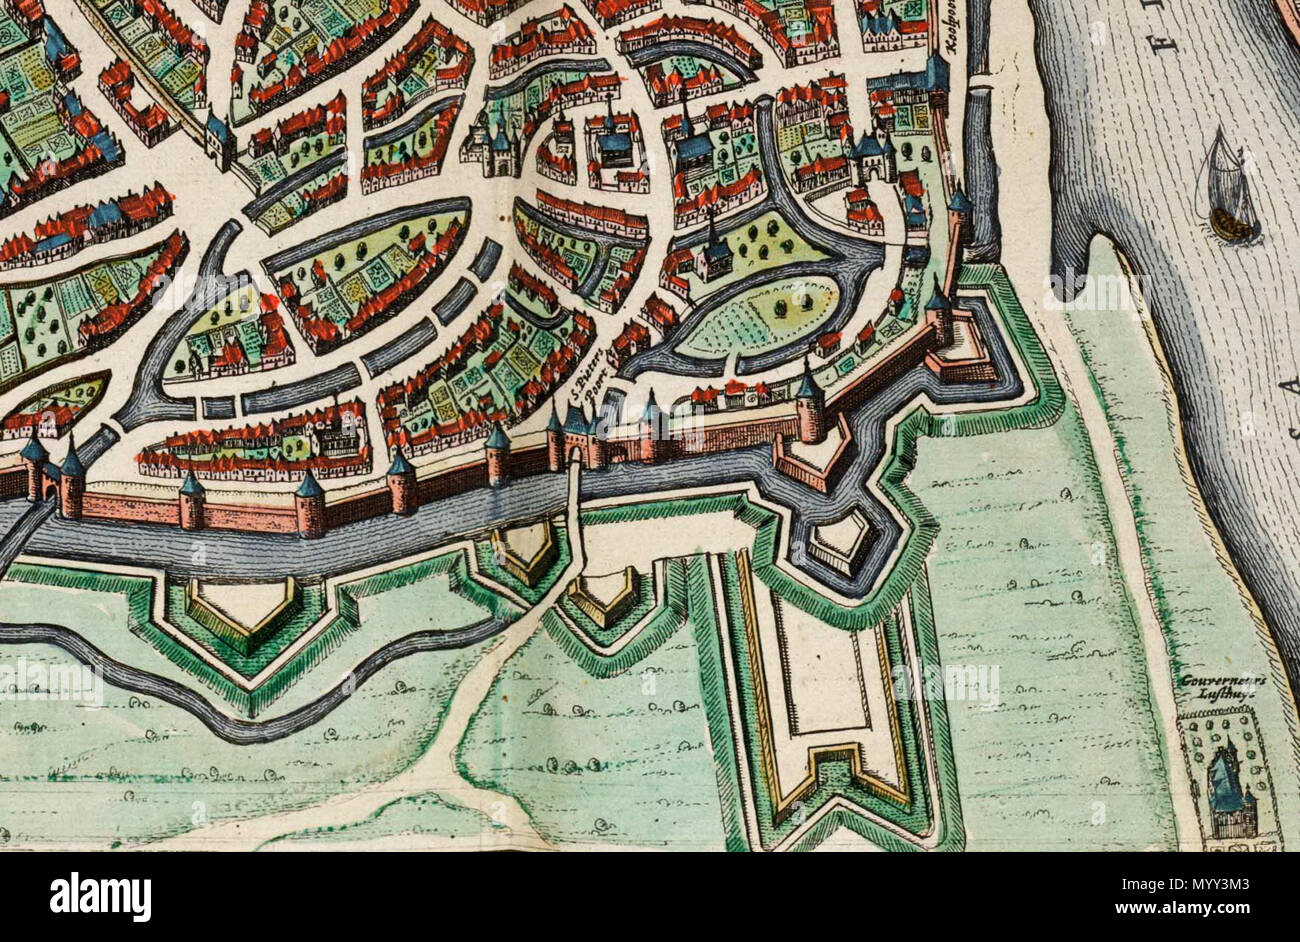 . English: Maastricht, the Netherlands. Detail of a map of Maastricht from the Atlas van Blaeu (1652) showing the Jekerkwartier area around Sint-Pieterspoort. Bottom left: watergate De Reek. Bottom right: La Motterie, home of the governor of Maastricht.  . 1649.   Joan Blaeu  (1596–1673)     Alternative names Johannes Blaeu; John Wiliamson Blaeu; Johannes Willemszoon Blaeu  Description Dutch cartographer and publisher  Date of birth/death 23 September 1596 21 December 1673  Location of birth/death Alkmaar Amsterdam  Work location Amsterdam; Vienna  Authority control  : Q379677 VIAF:?41887929 I Stock Photo